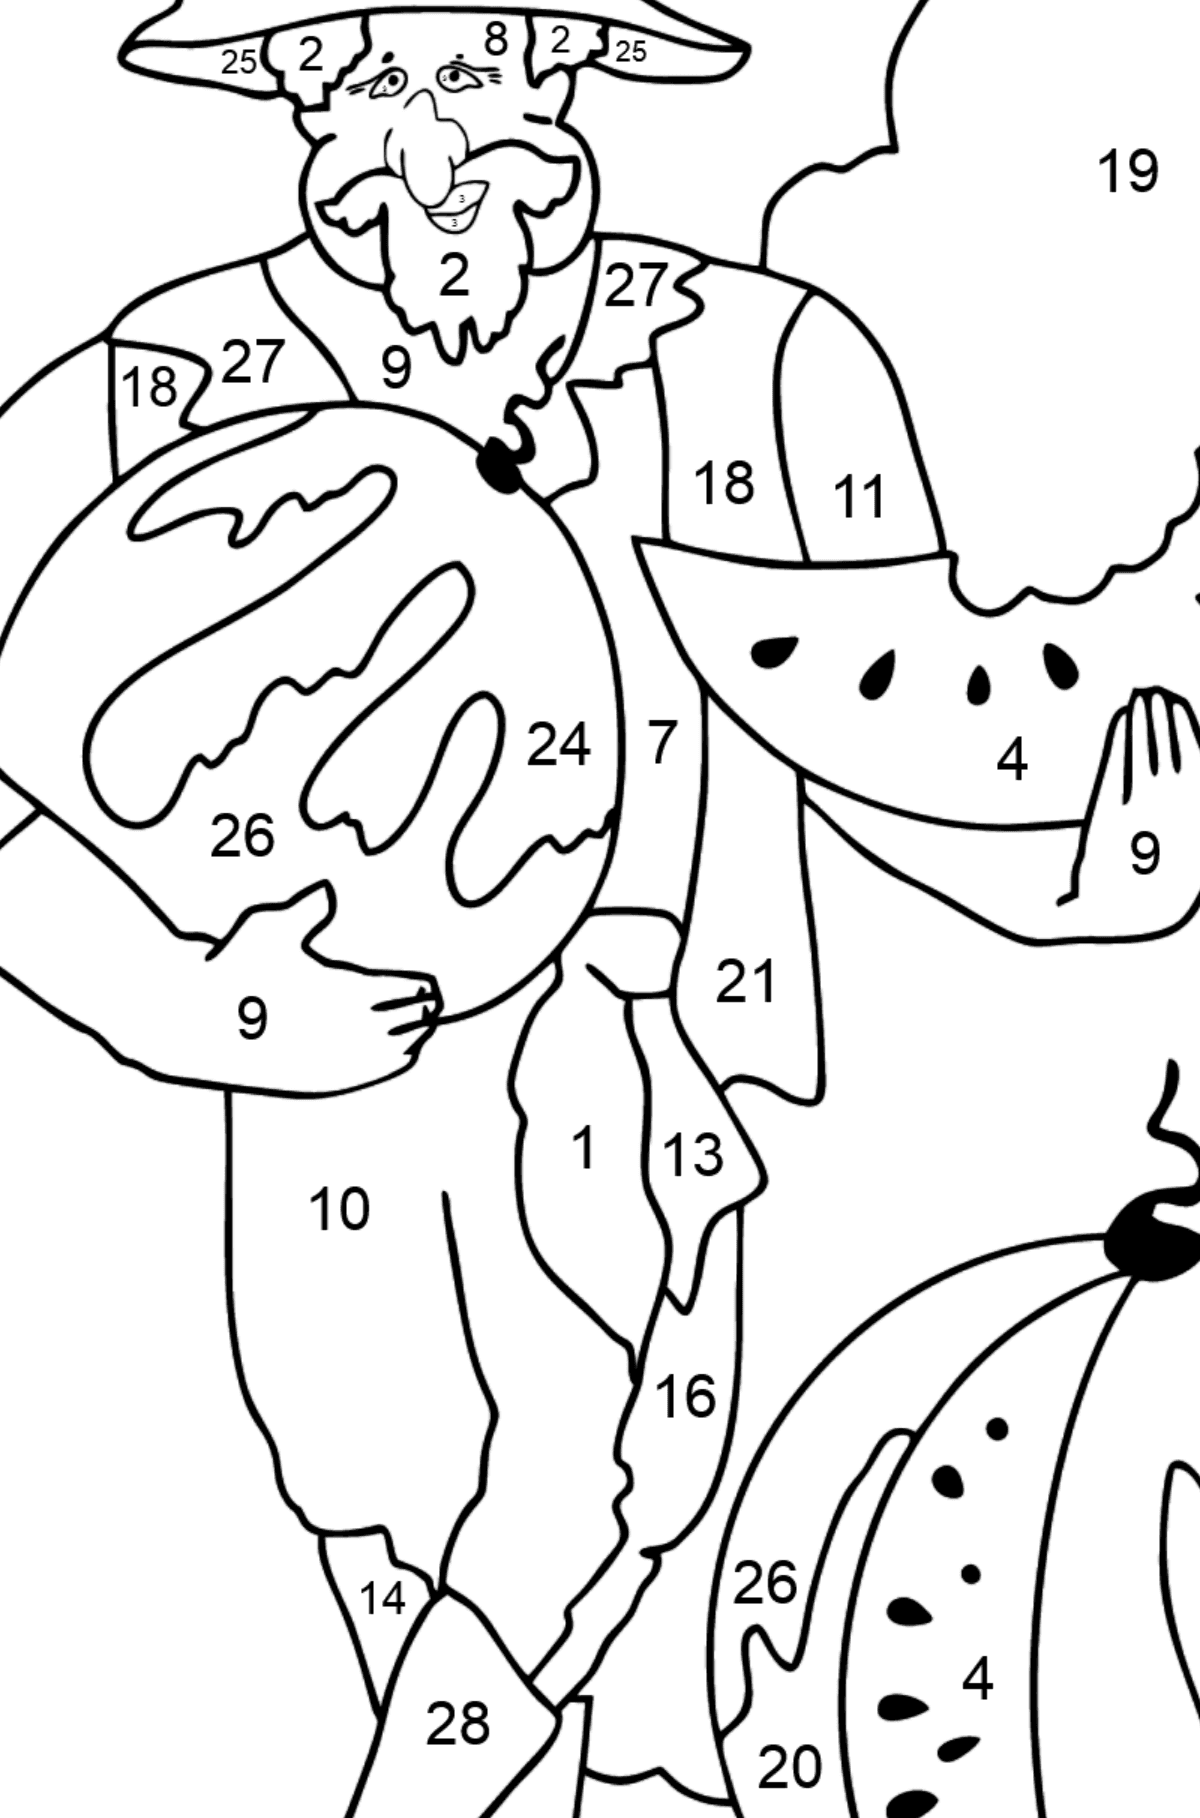 Coloring Page - A Pirate is Sharing a Ripe Watermelon - Coloring by Numbers for Kids